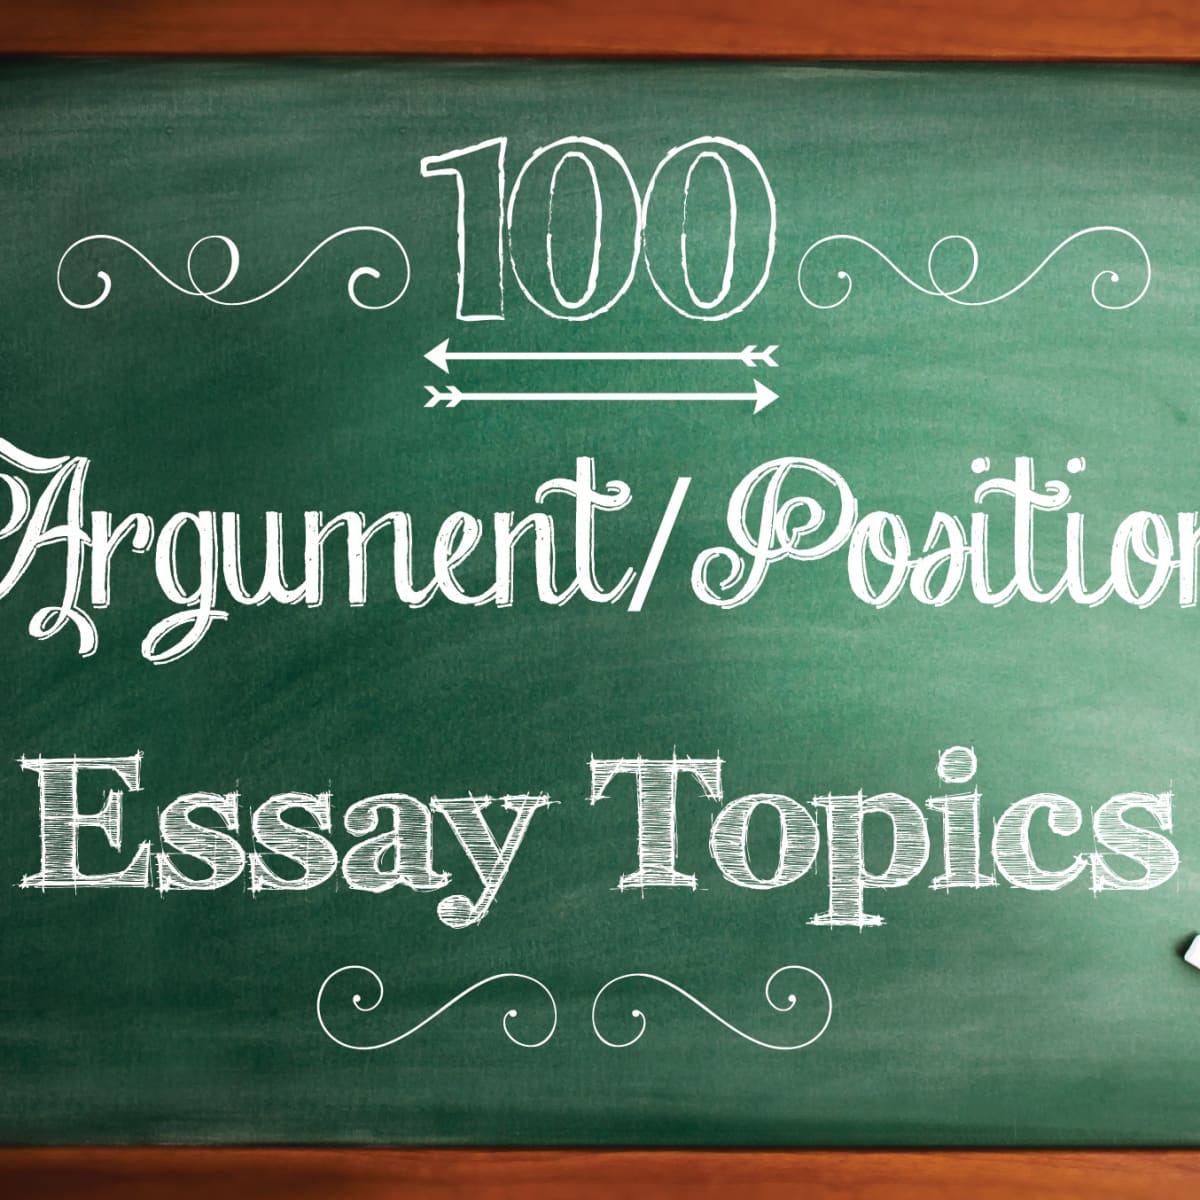 cause and effect essay topics for 5th grade